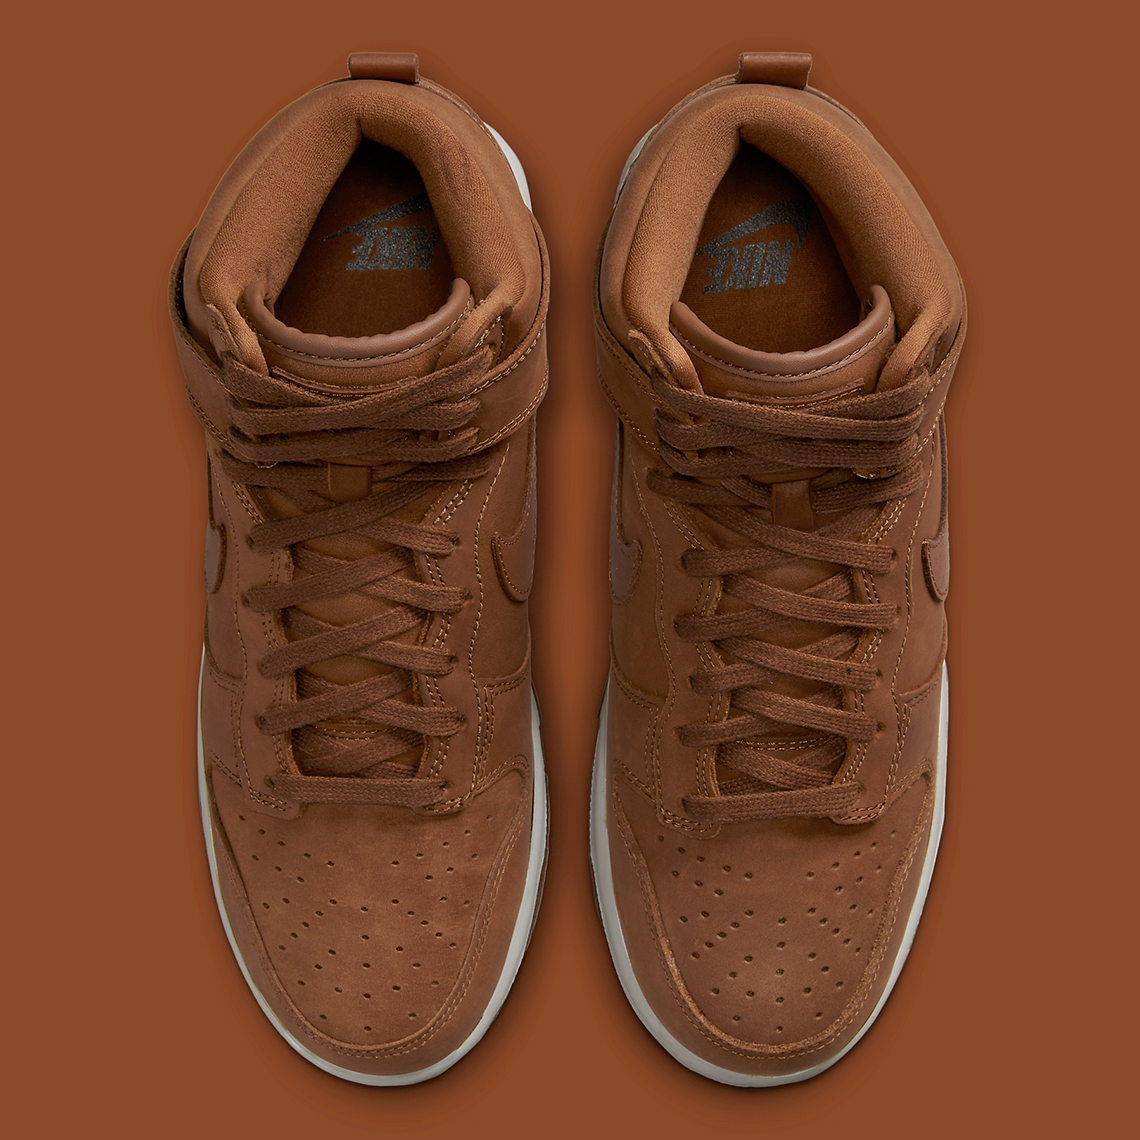 nike dunk high brown suede release date 2